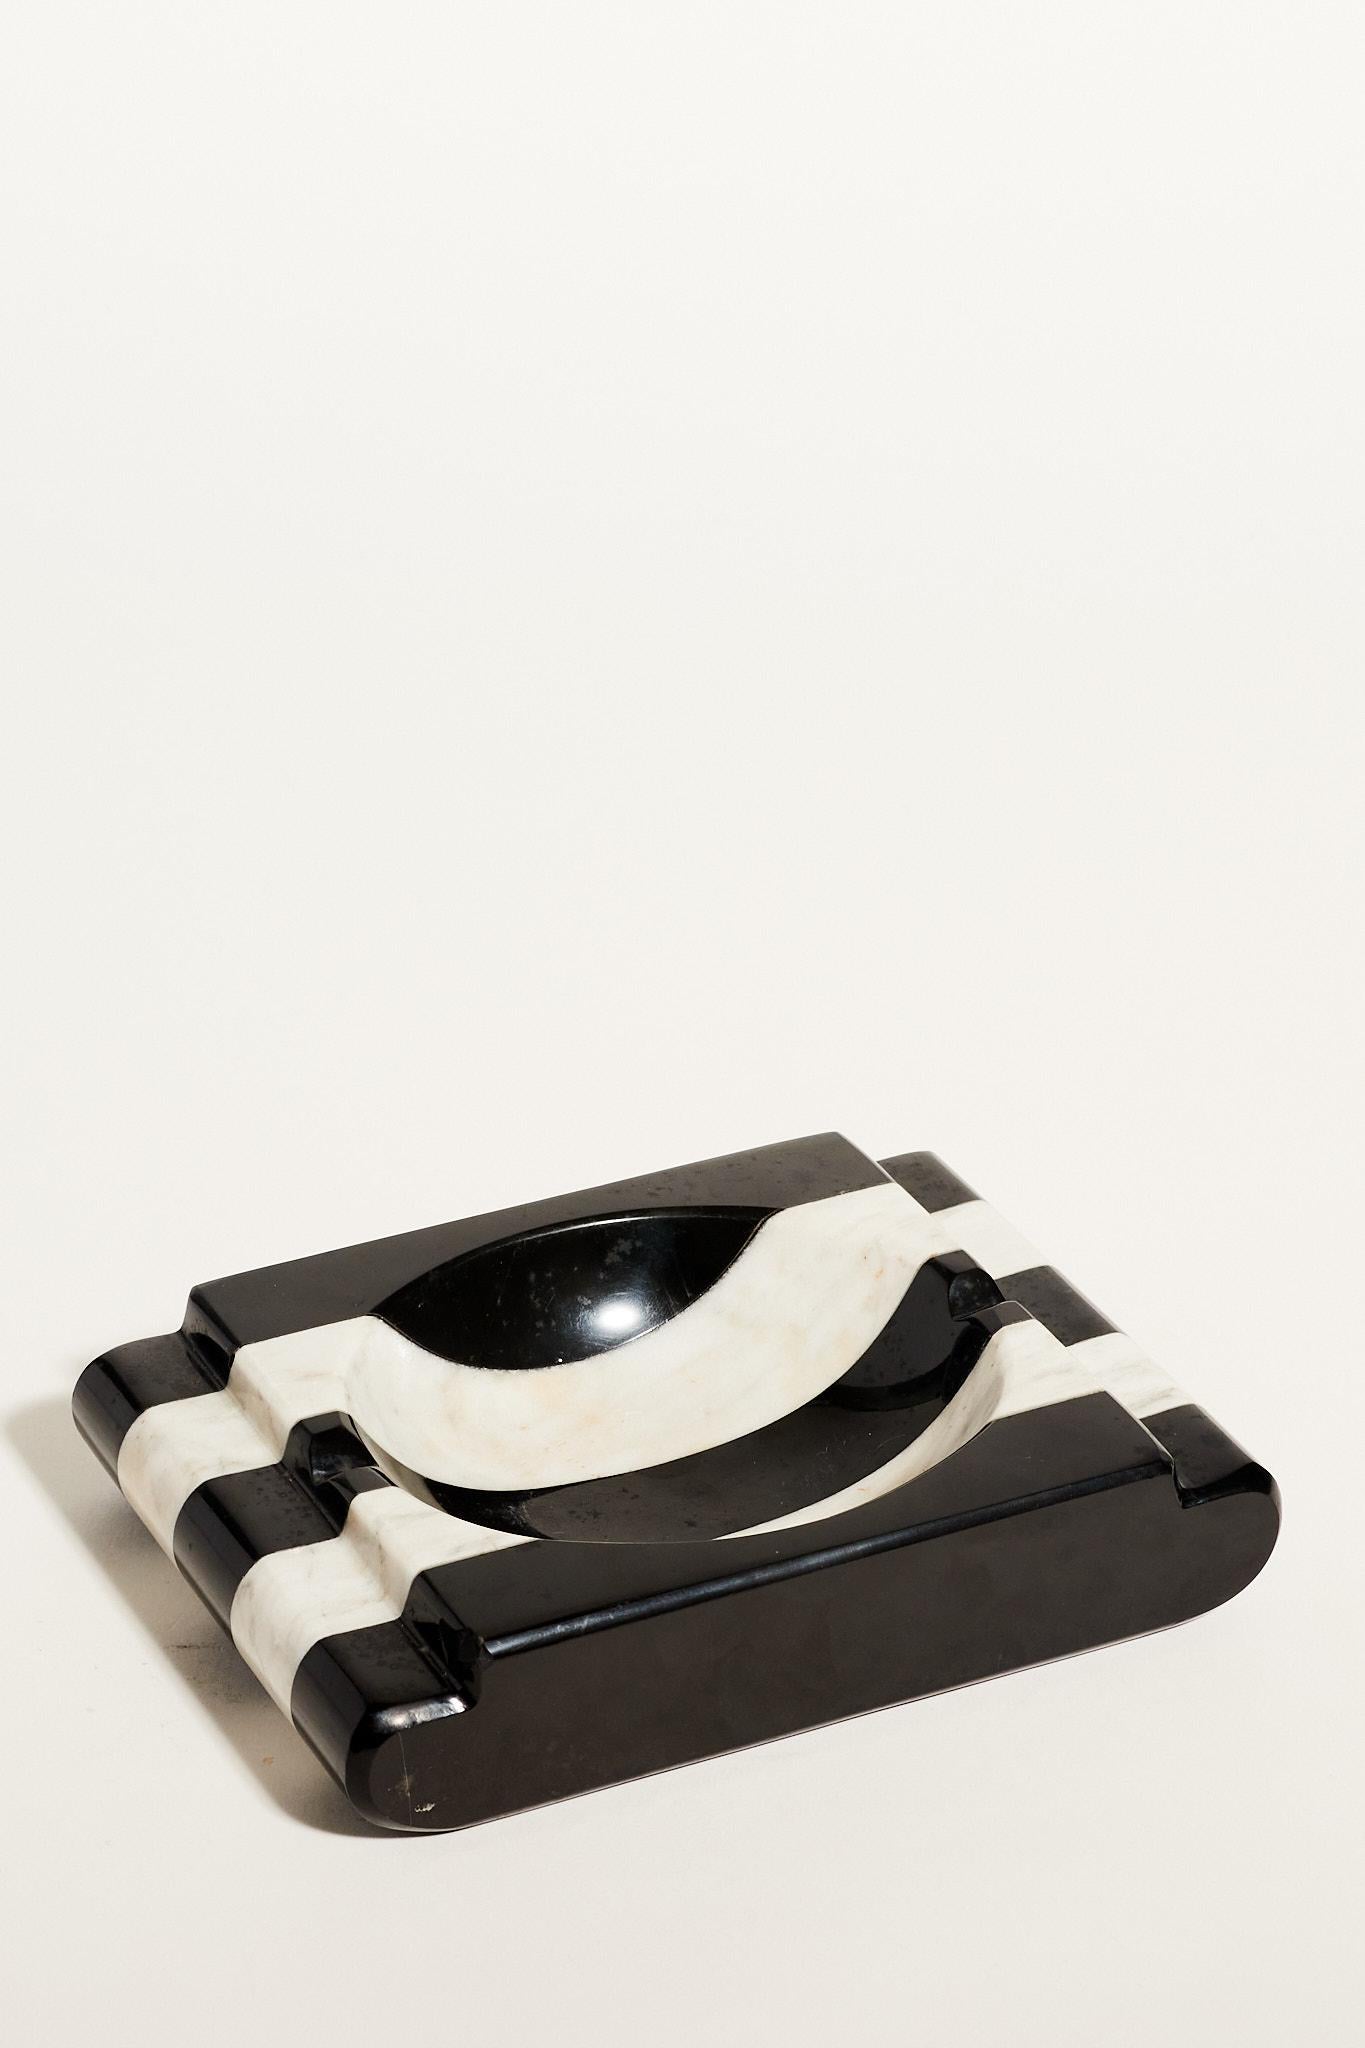 Black and white striped marble catchall or ashtray.